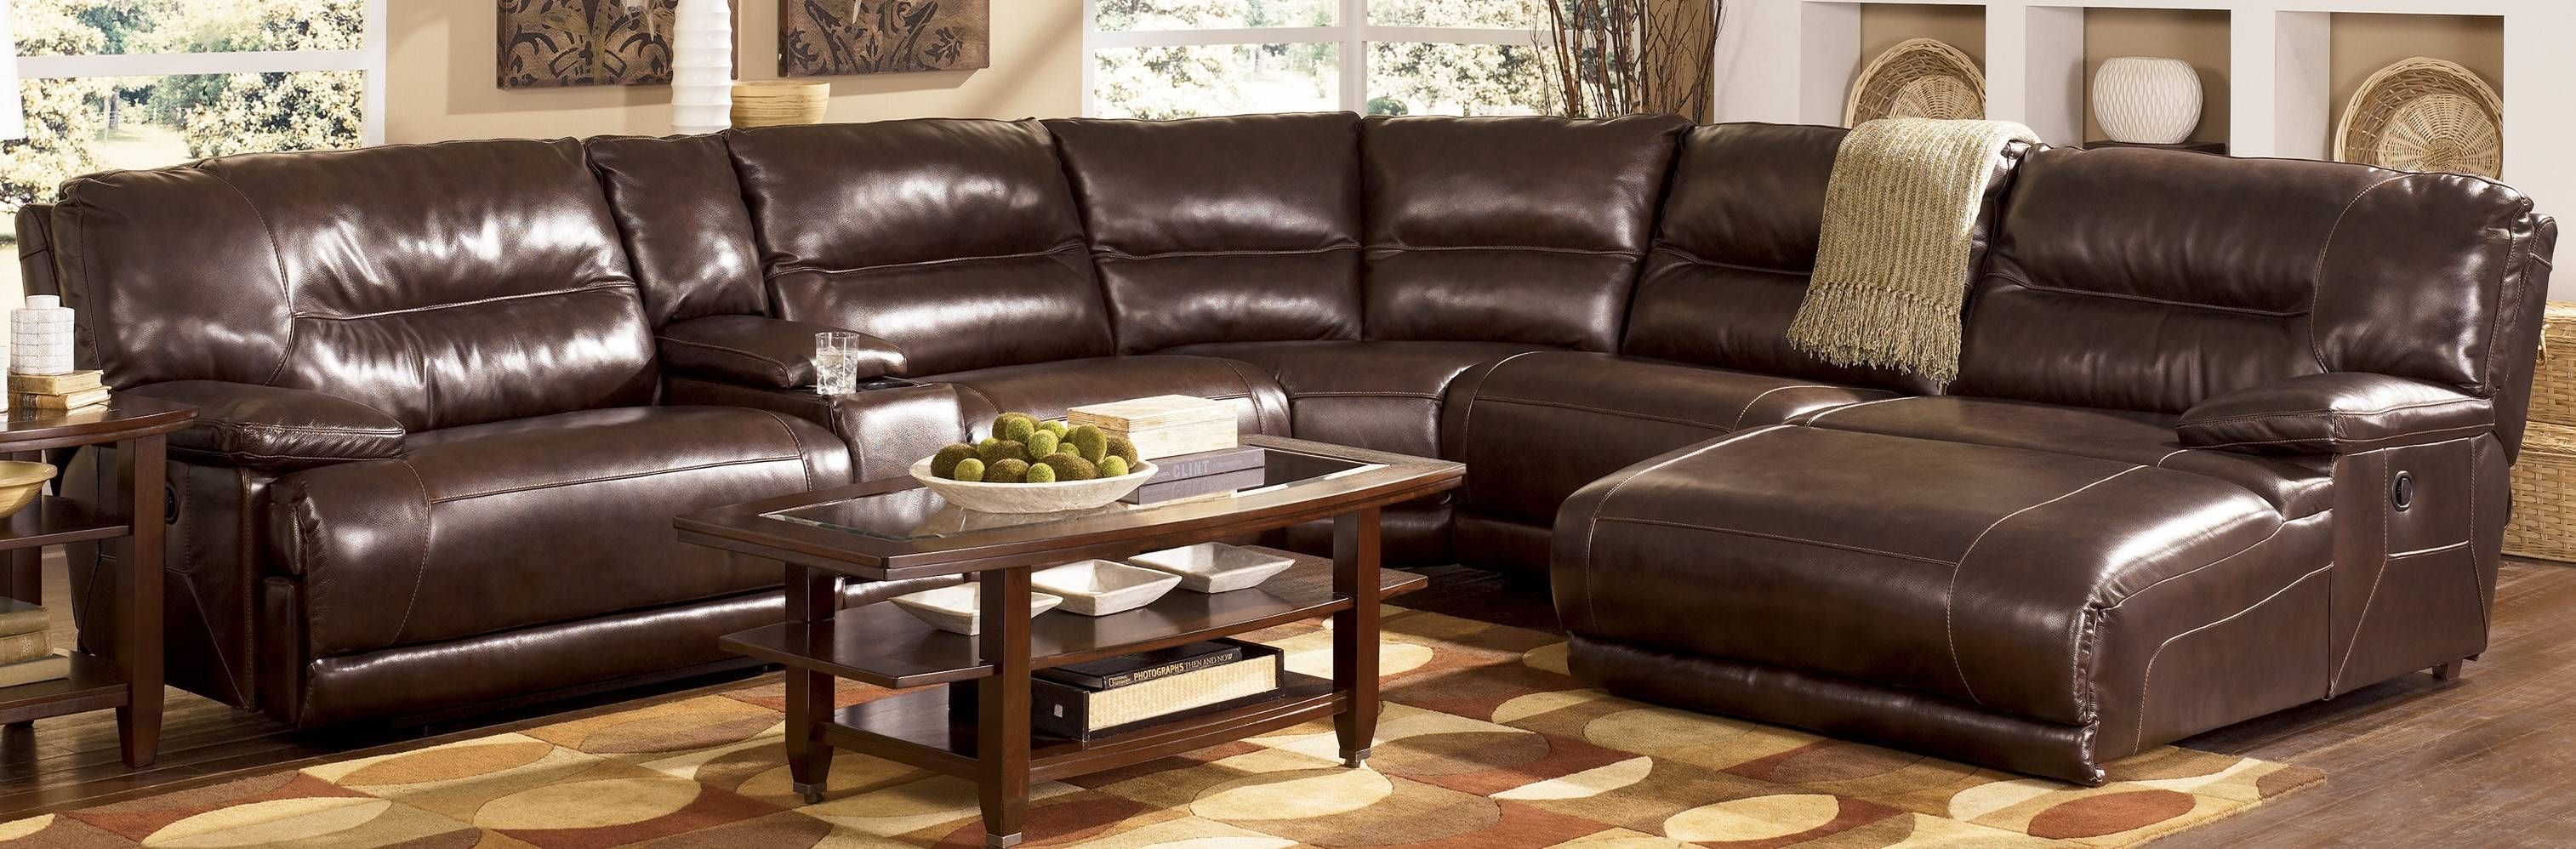 Inspiring Leather Sectional Sofas With Recliners And Chaise 23 For With Regard To Down Filled Sofa Sectional (Photo 15 of 25)